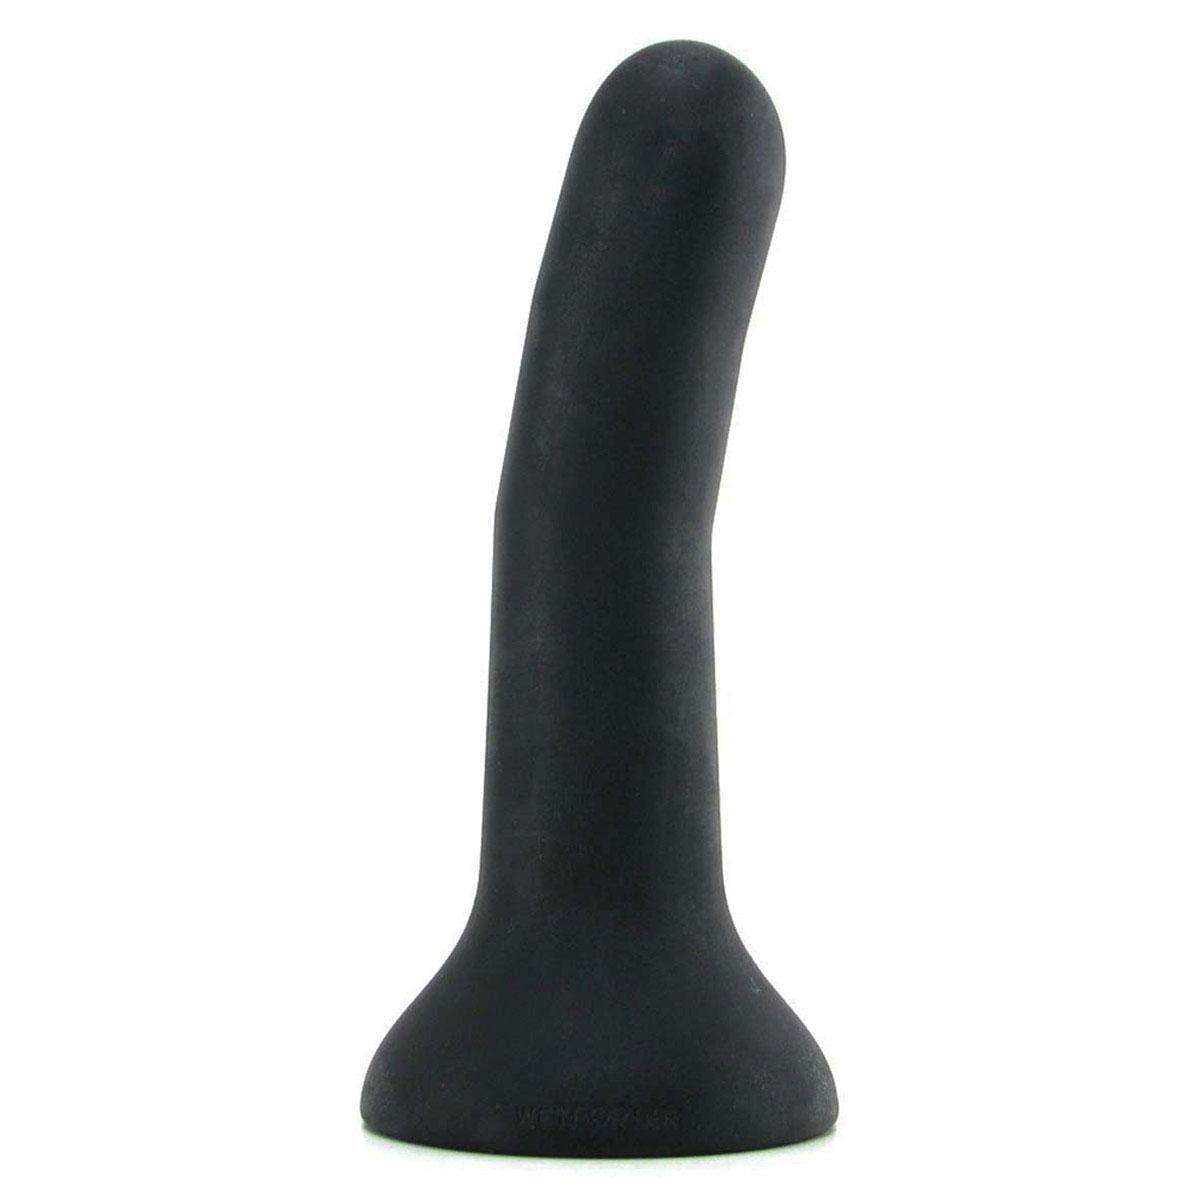 Wet for Her Five Jules - Medium - Black Noir - Buy At Luxury Toy X - Free 3-Day Shipping